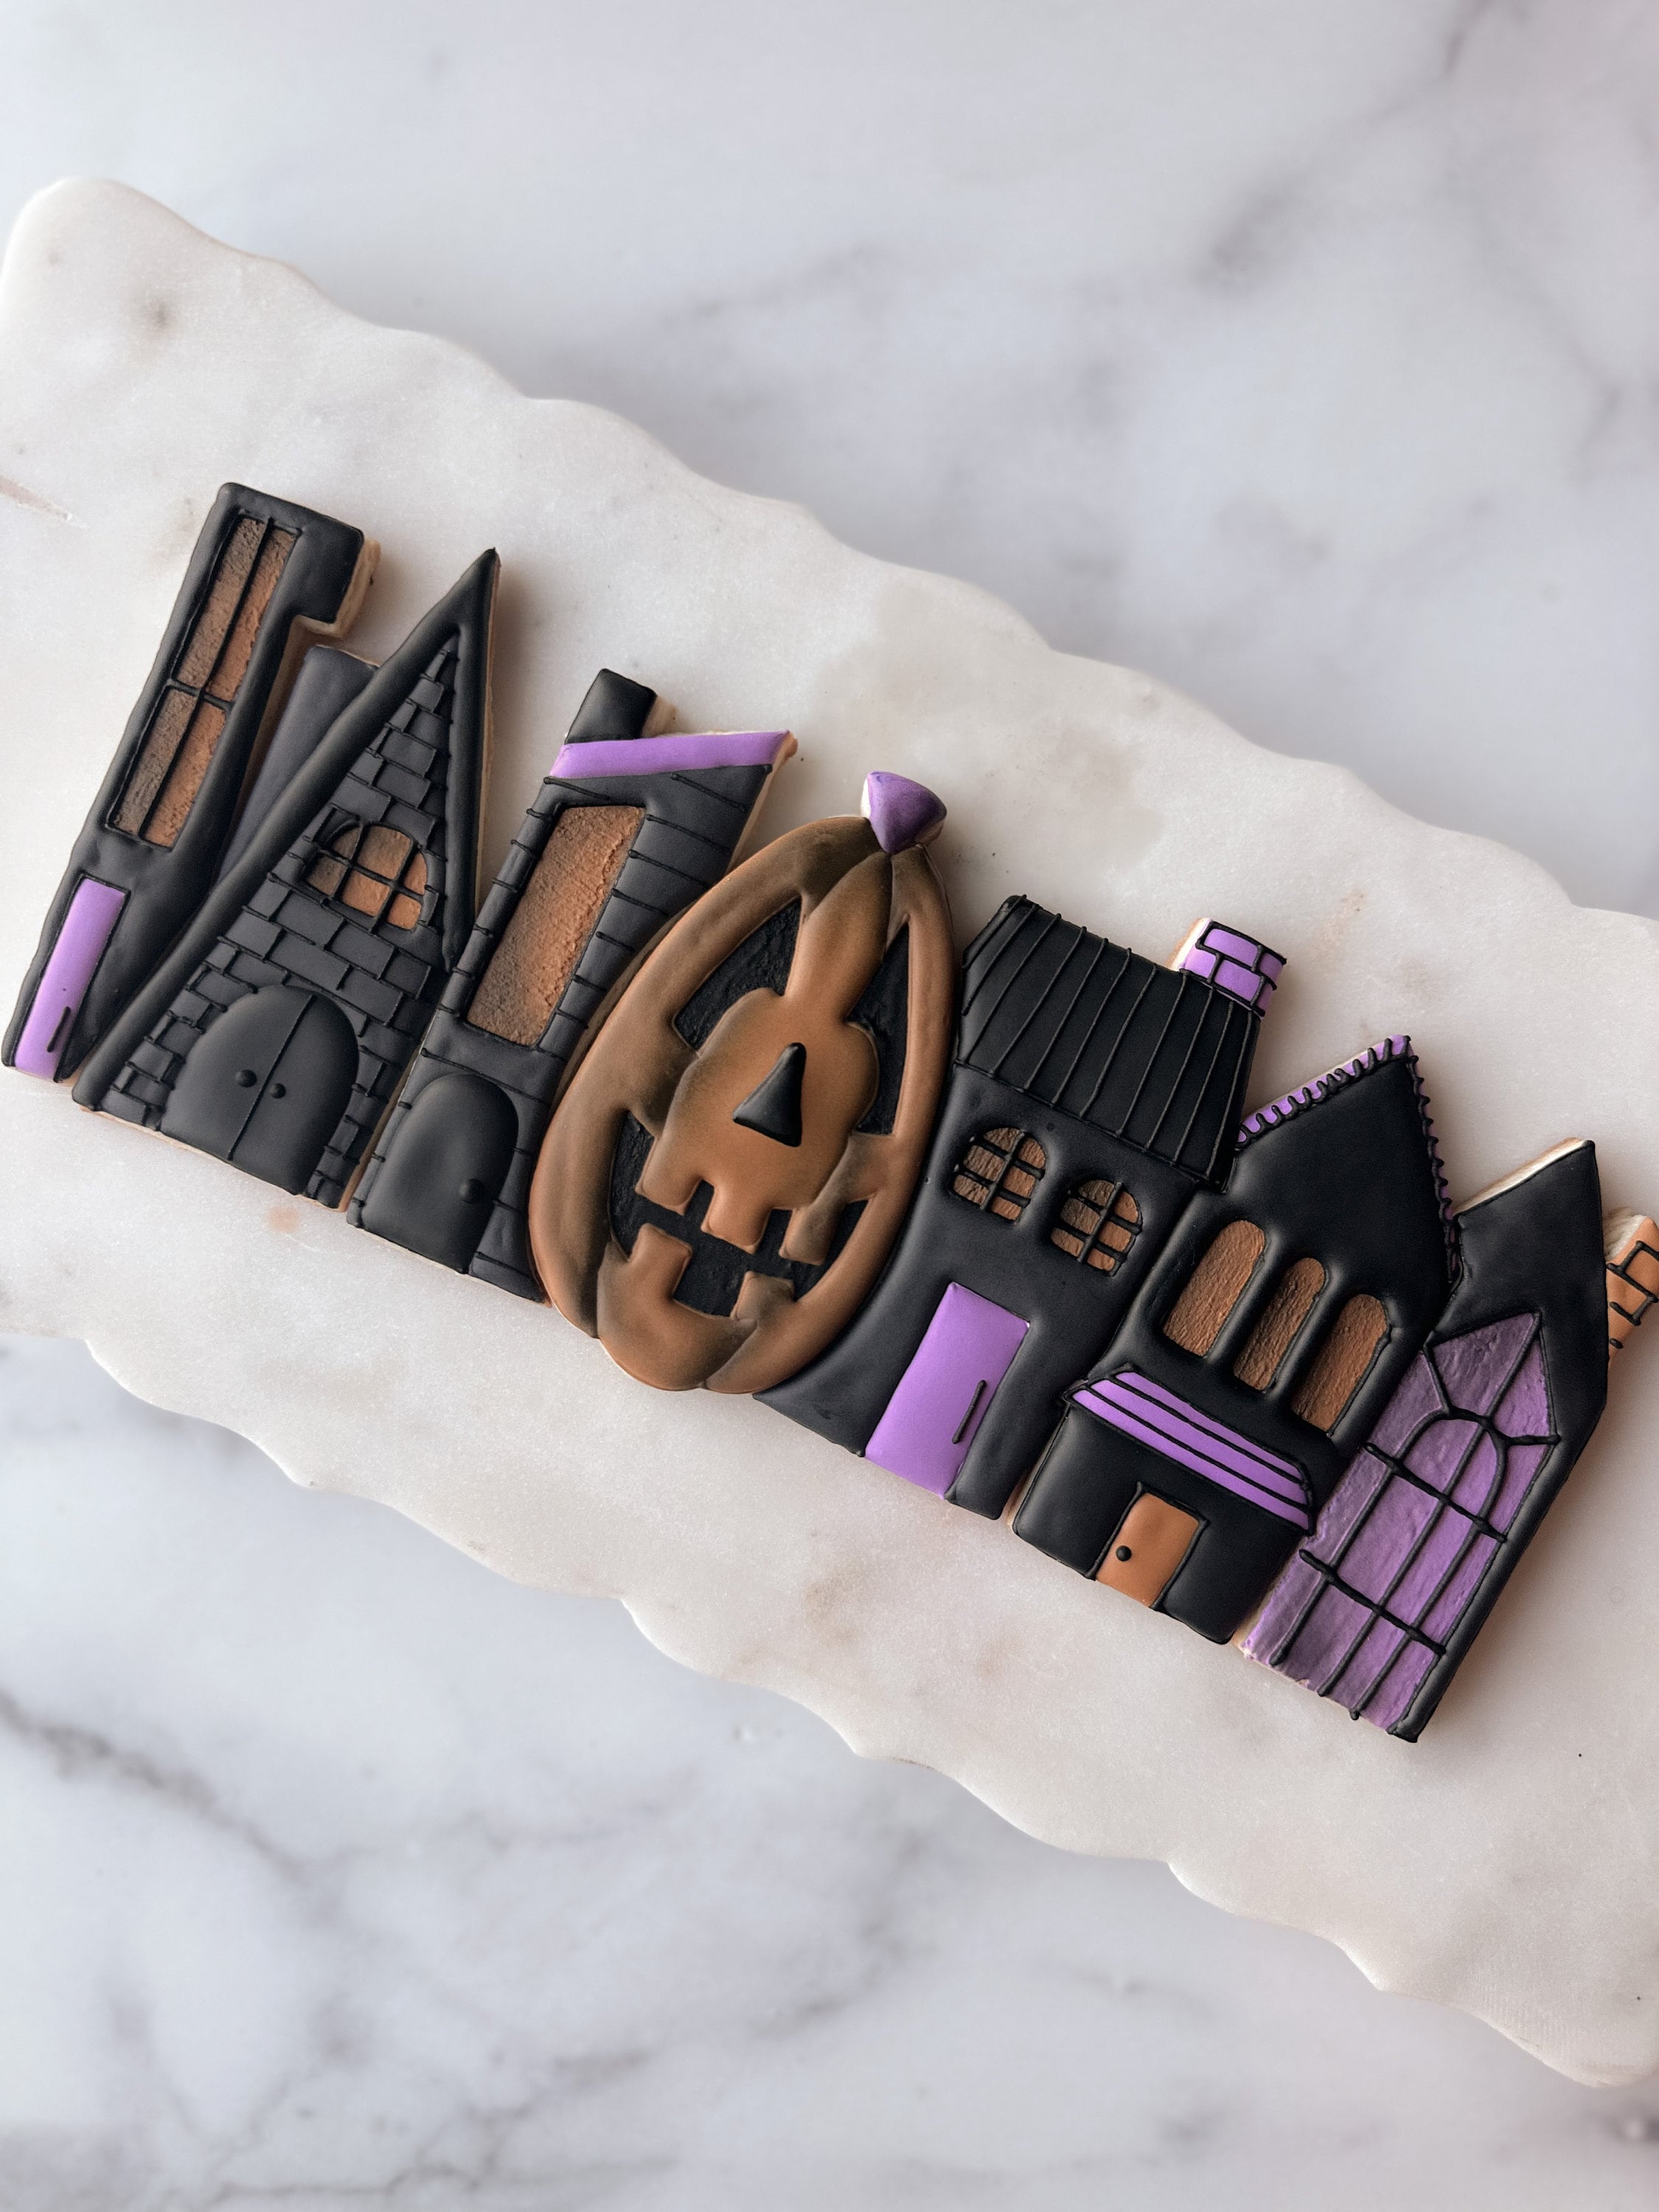 Haunted whimsical village cookie cutter set of 7